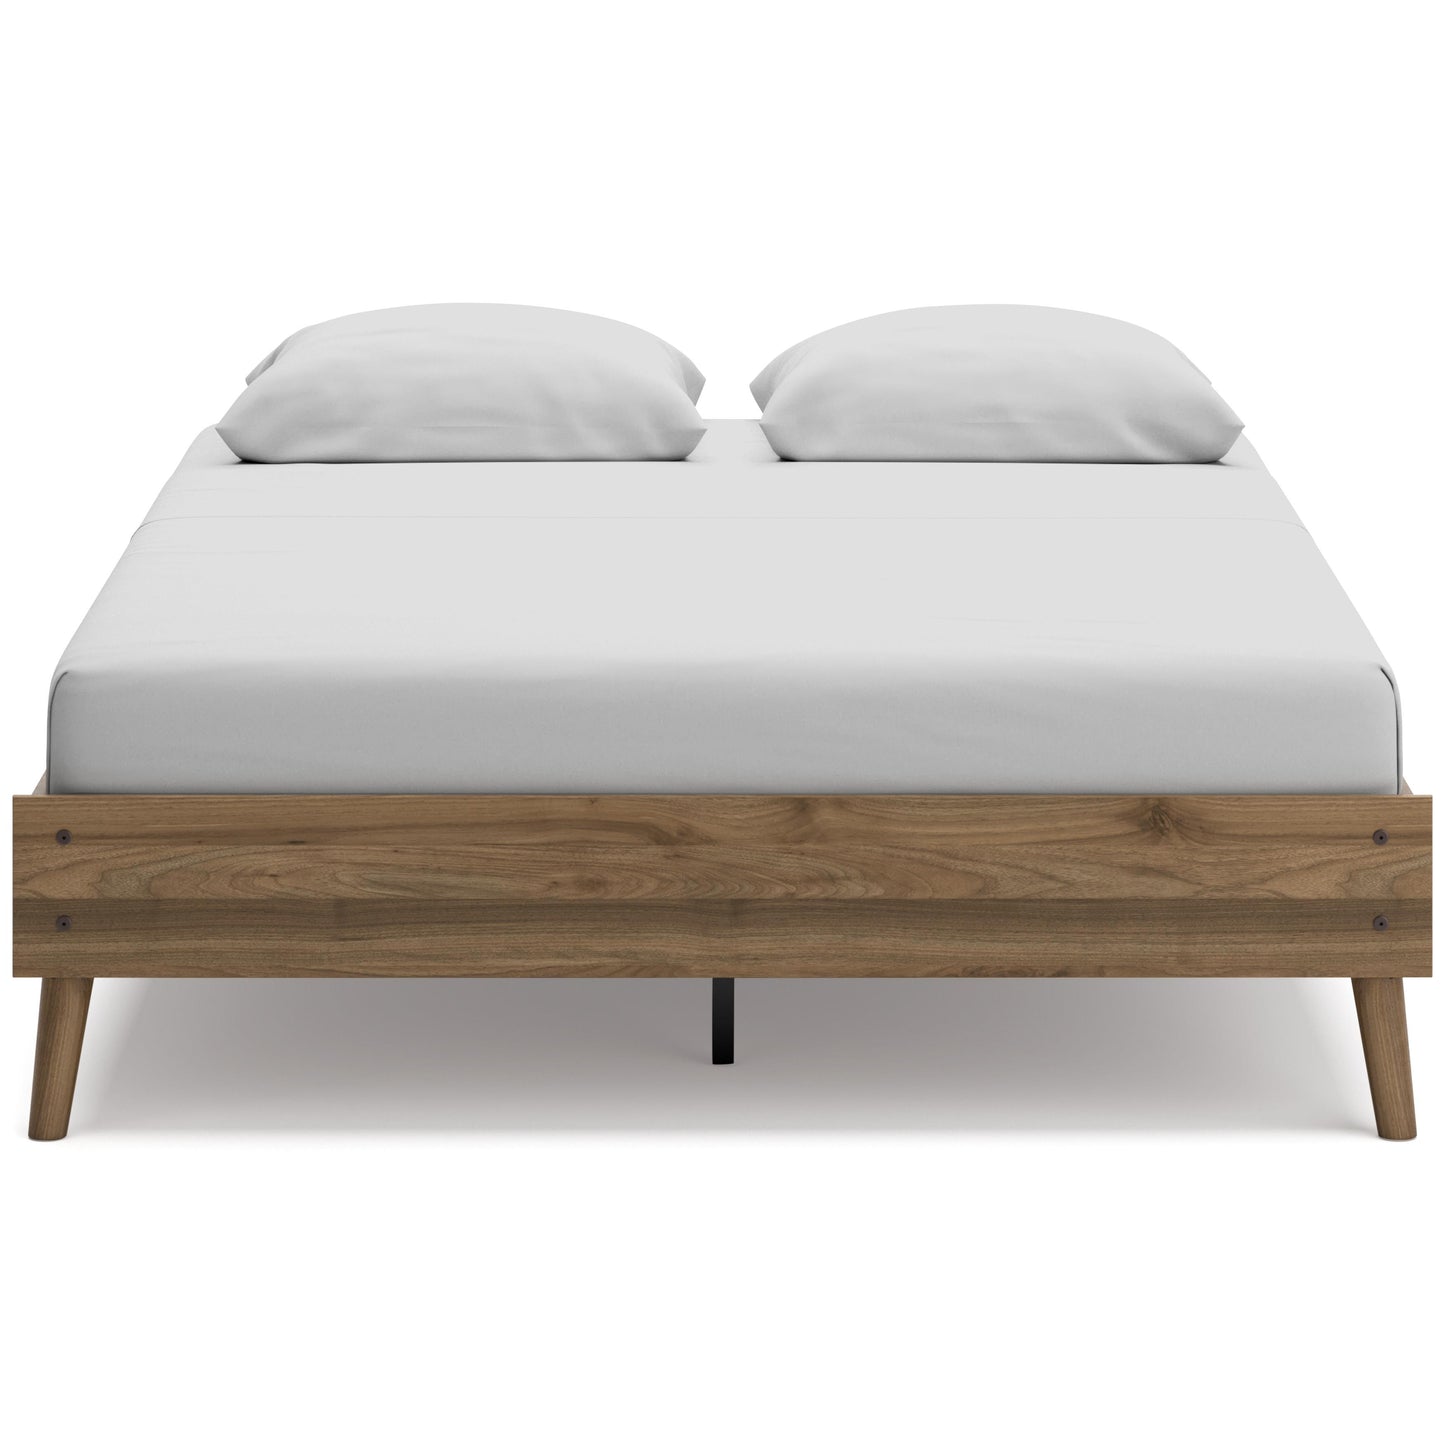 Signature Design by Ashley Aprilyn Queen Platform Bed EB1187-113 IMAGE 2